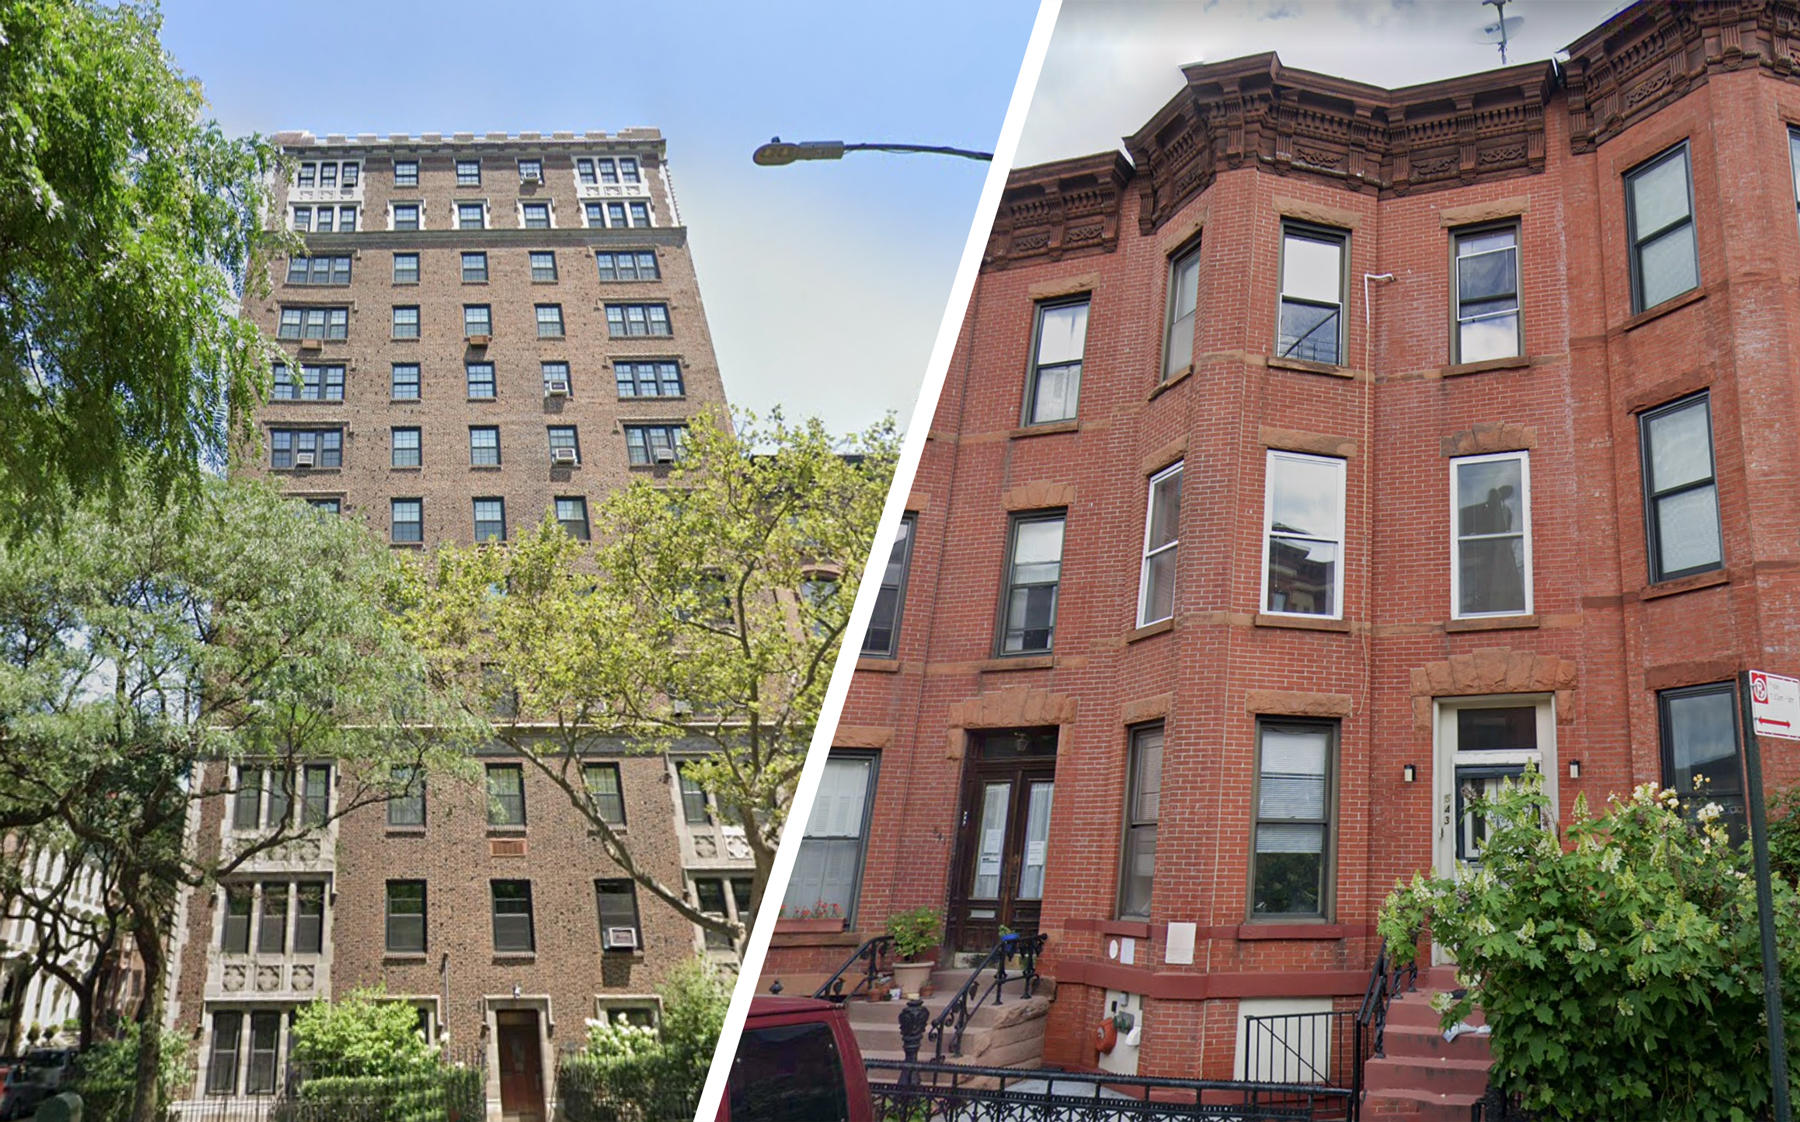 1 Pierrepont Street and 543 11th Street in Brooklyn (Credit: Google Maps)